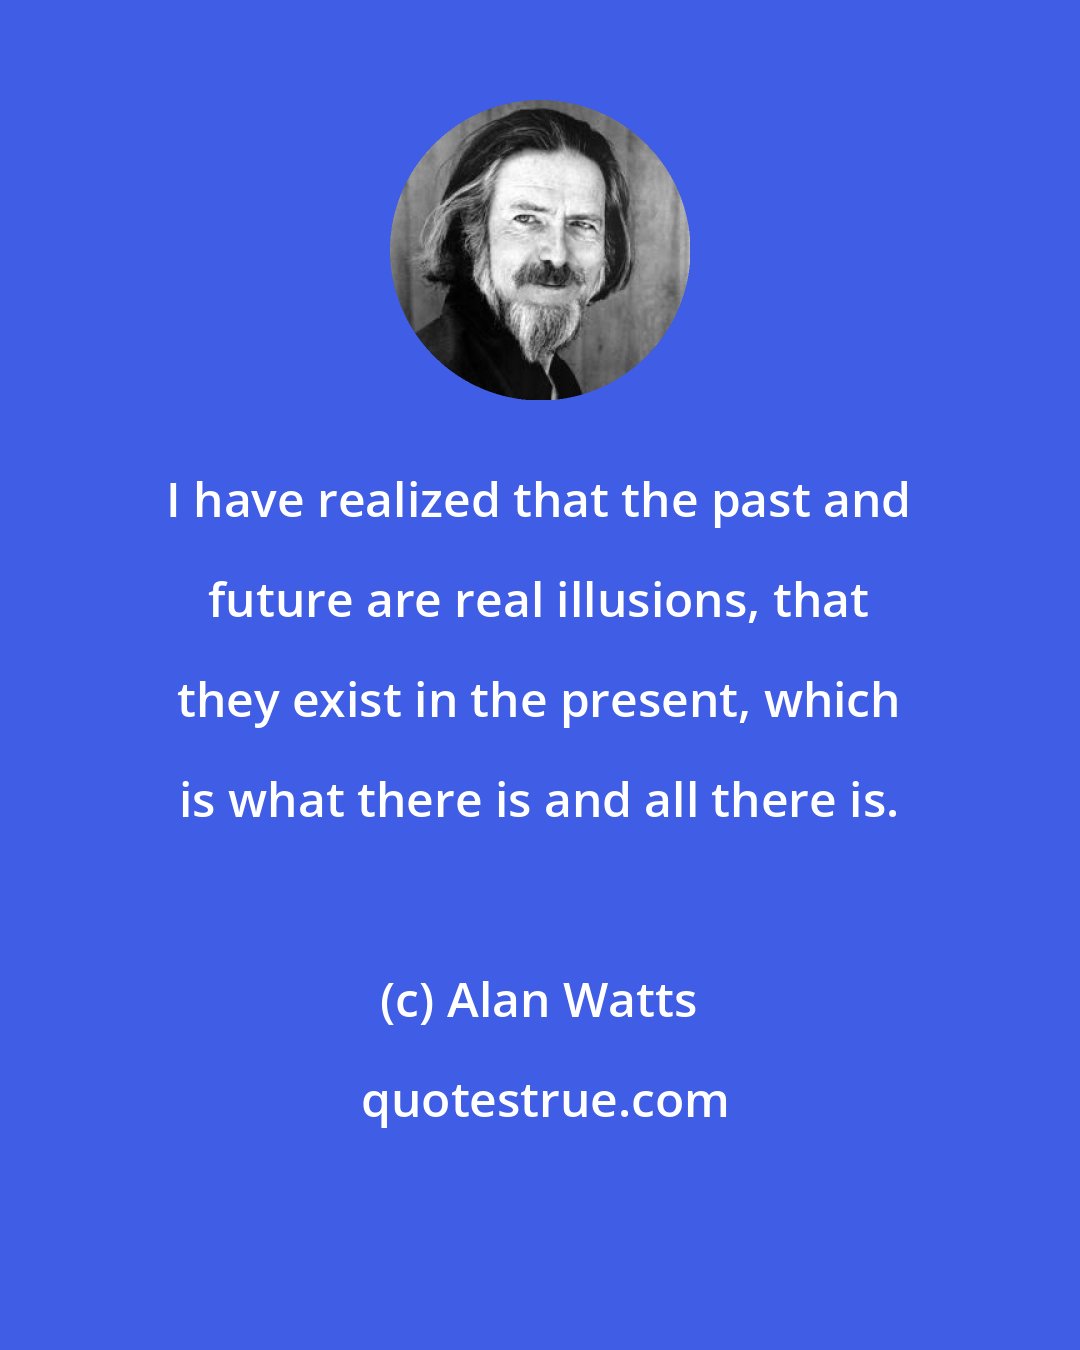 Alan Watts: I have realized that the past and future are real illusions, that they exist in the present, which is what there is and all there is.